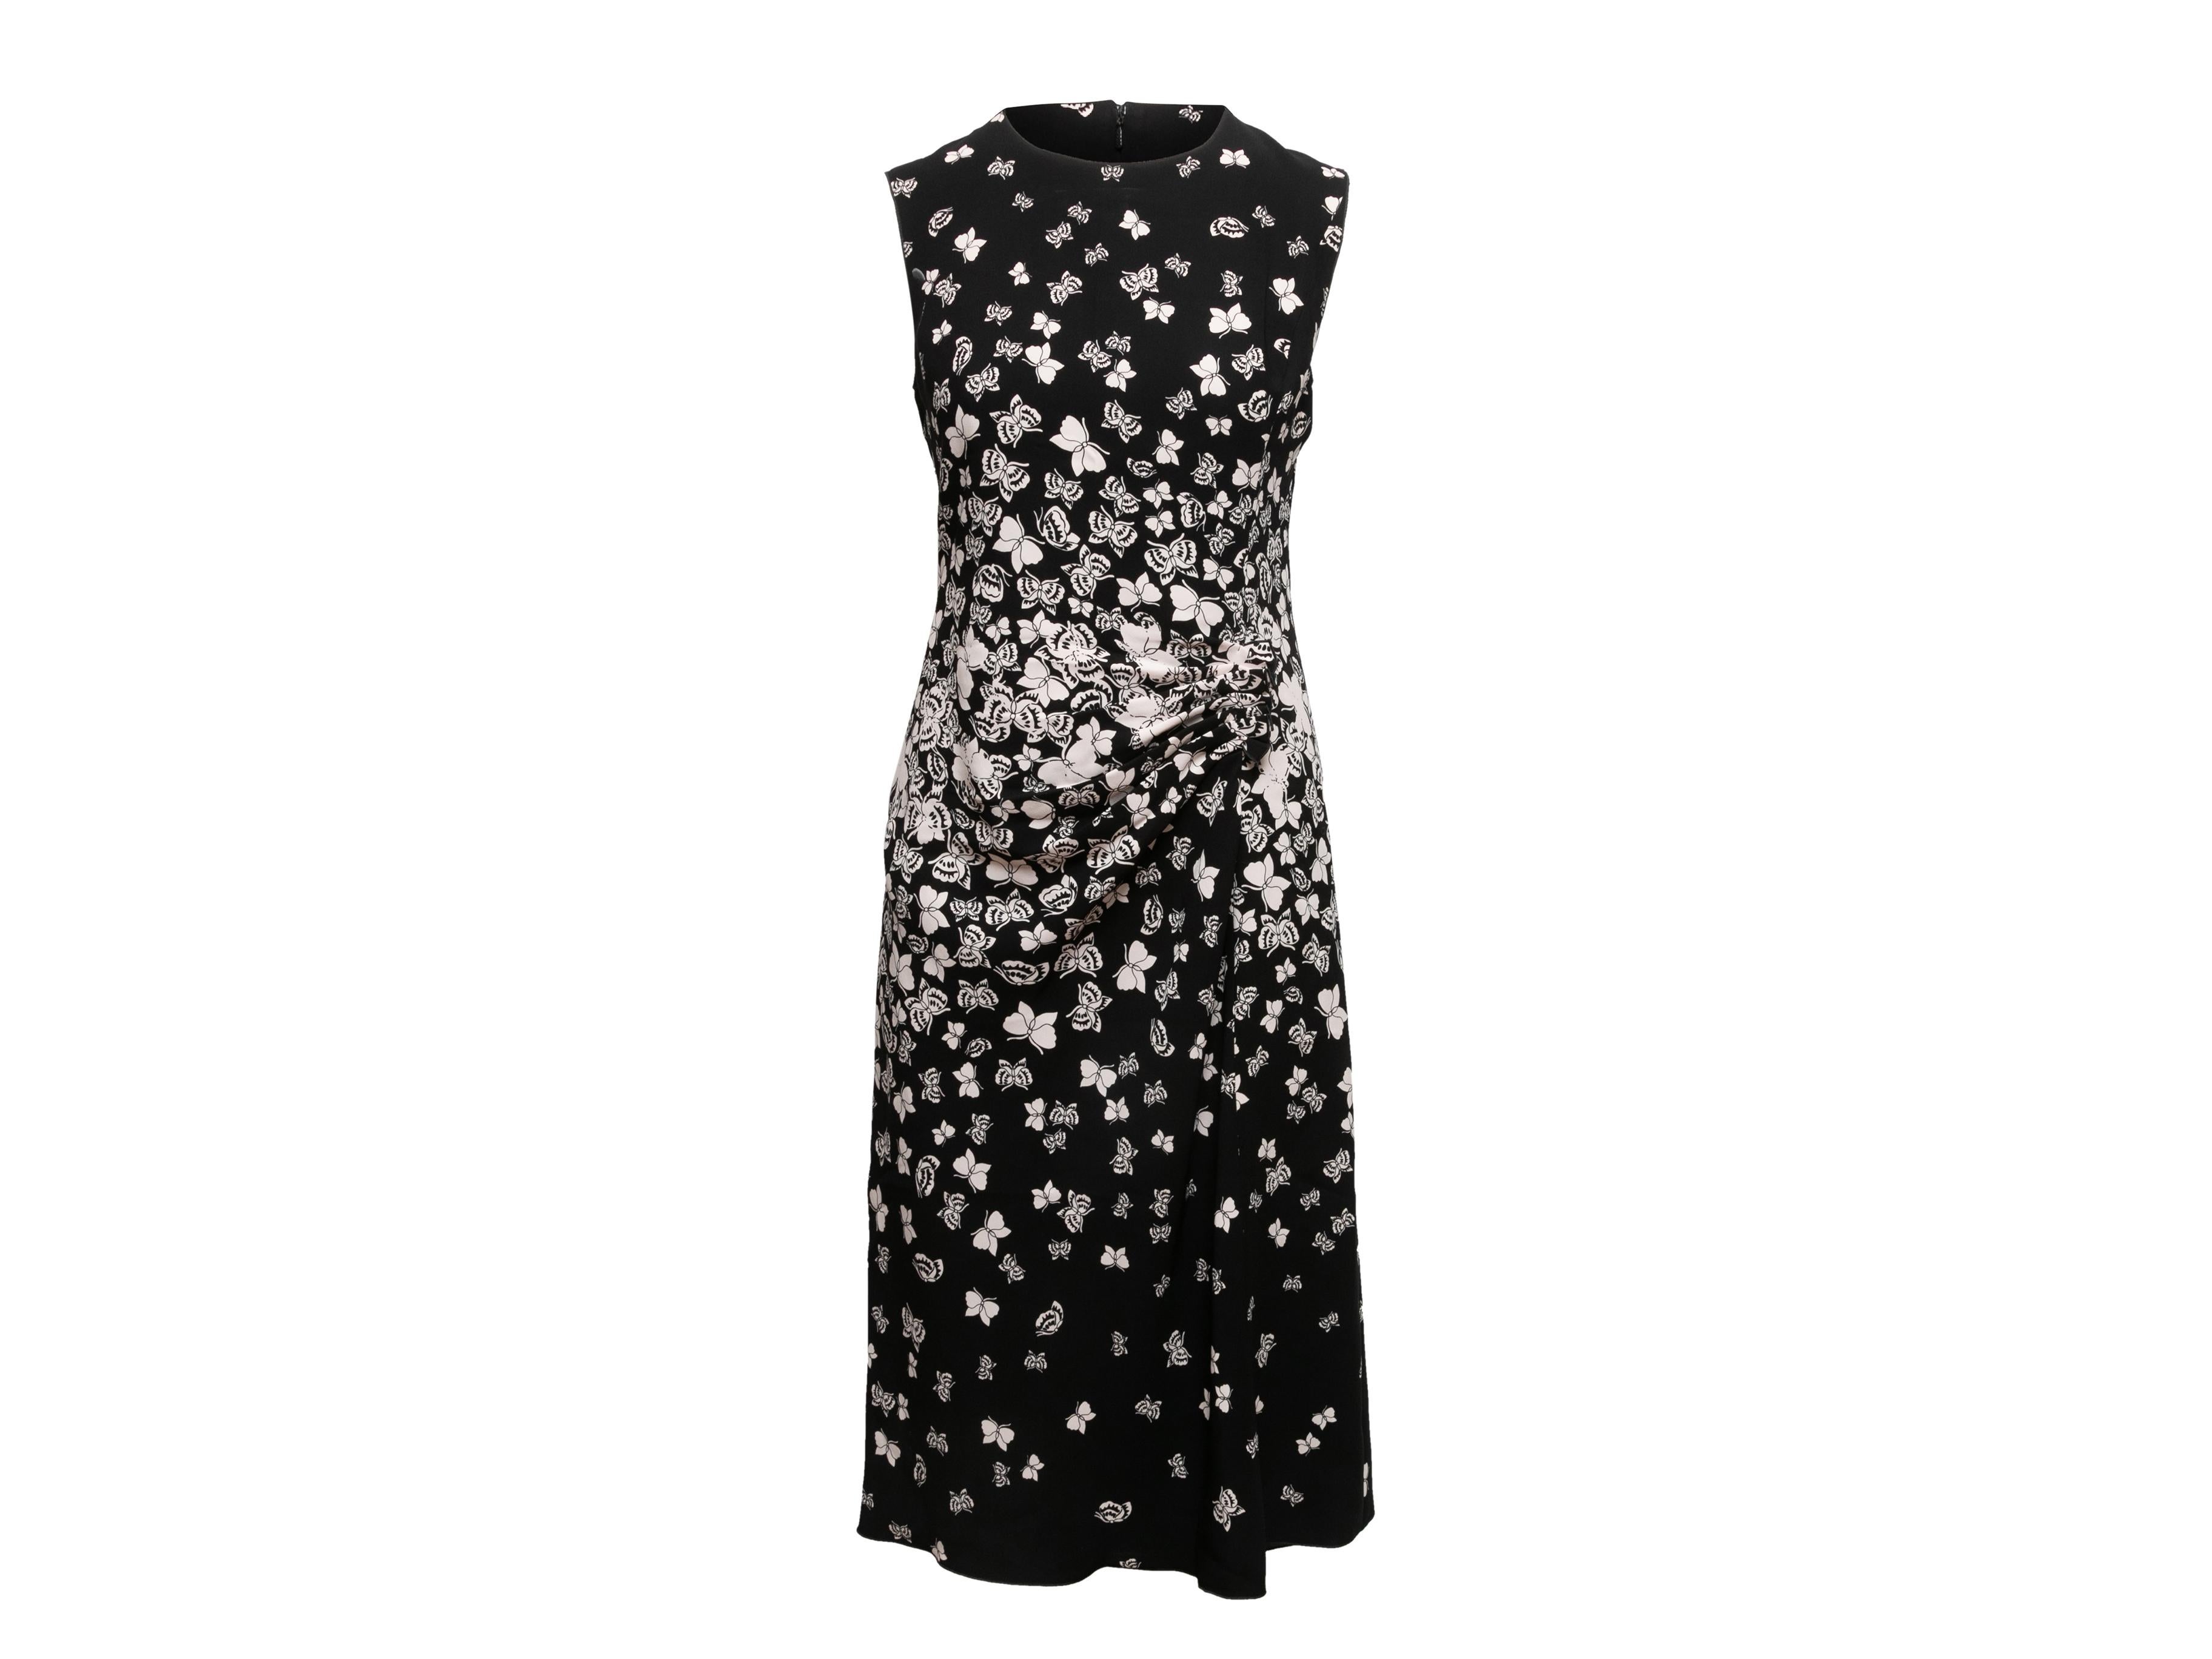 Black and white butterfly print dress by Bottega Veneta. Crew neck. Sleeveless. Gathering at front waist side. Zip closure at back. 34